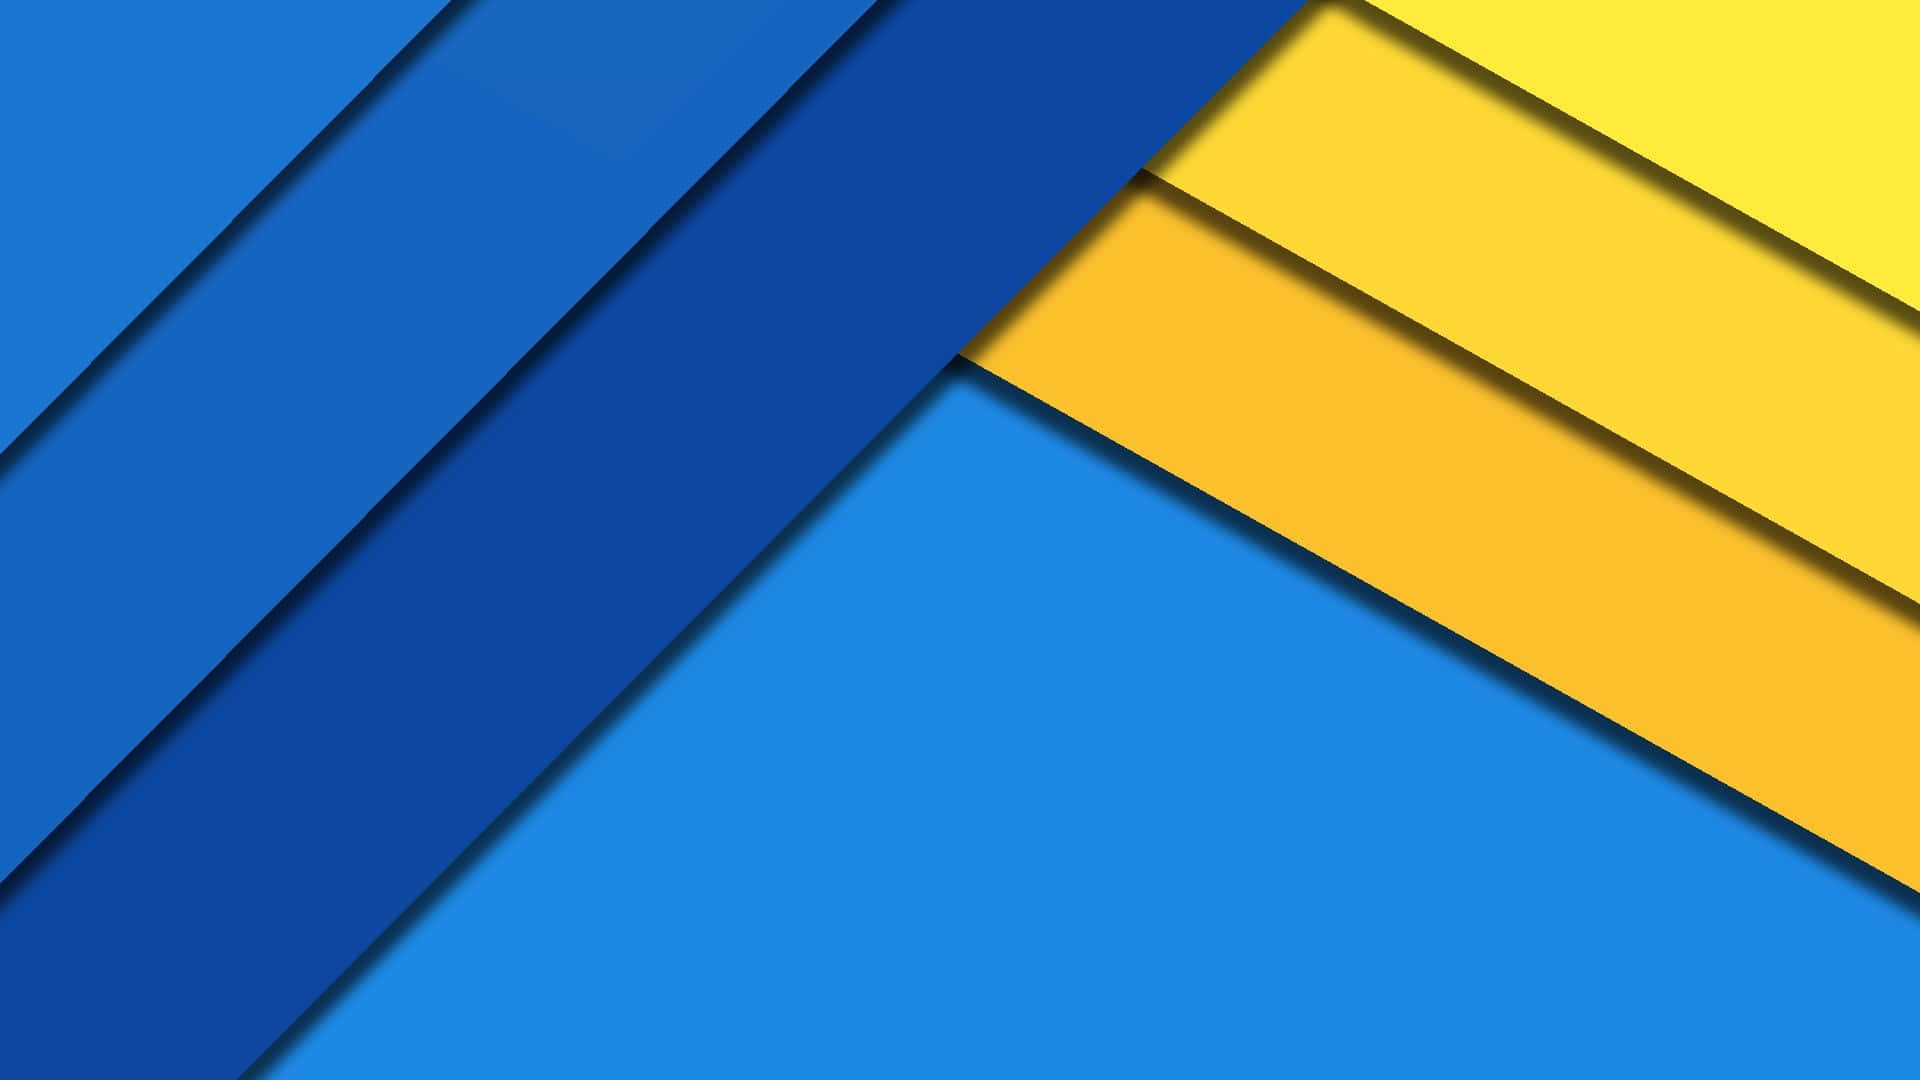 Bright, Bold and Contrasting - A Yellow and Blue Background